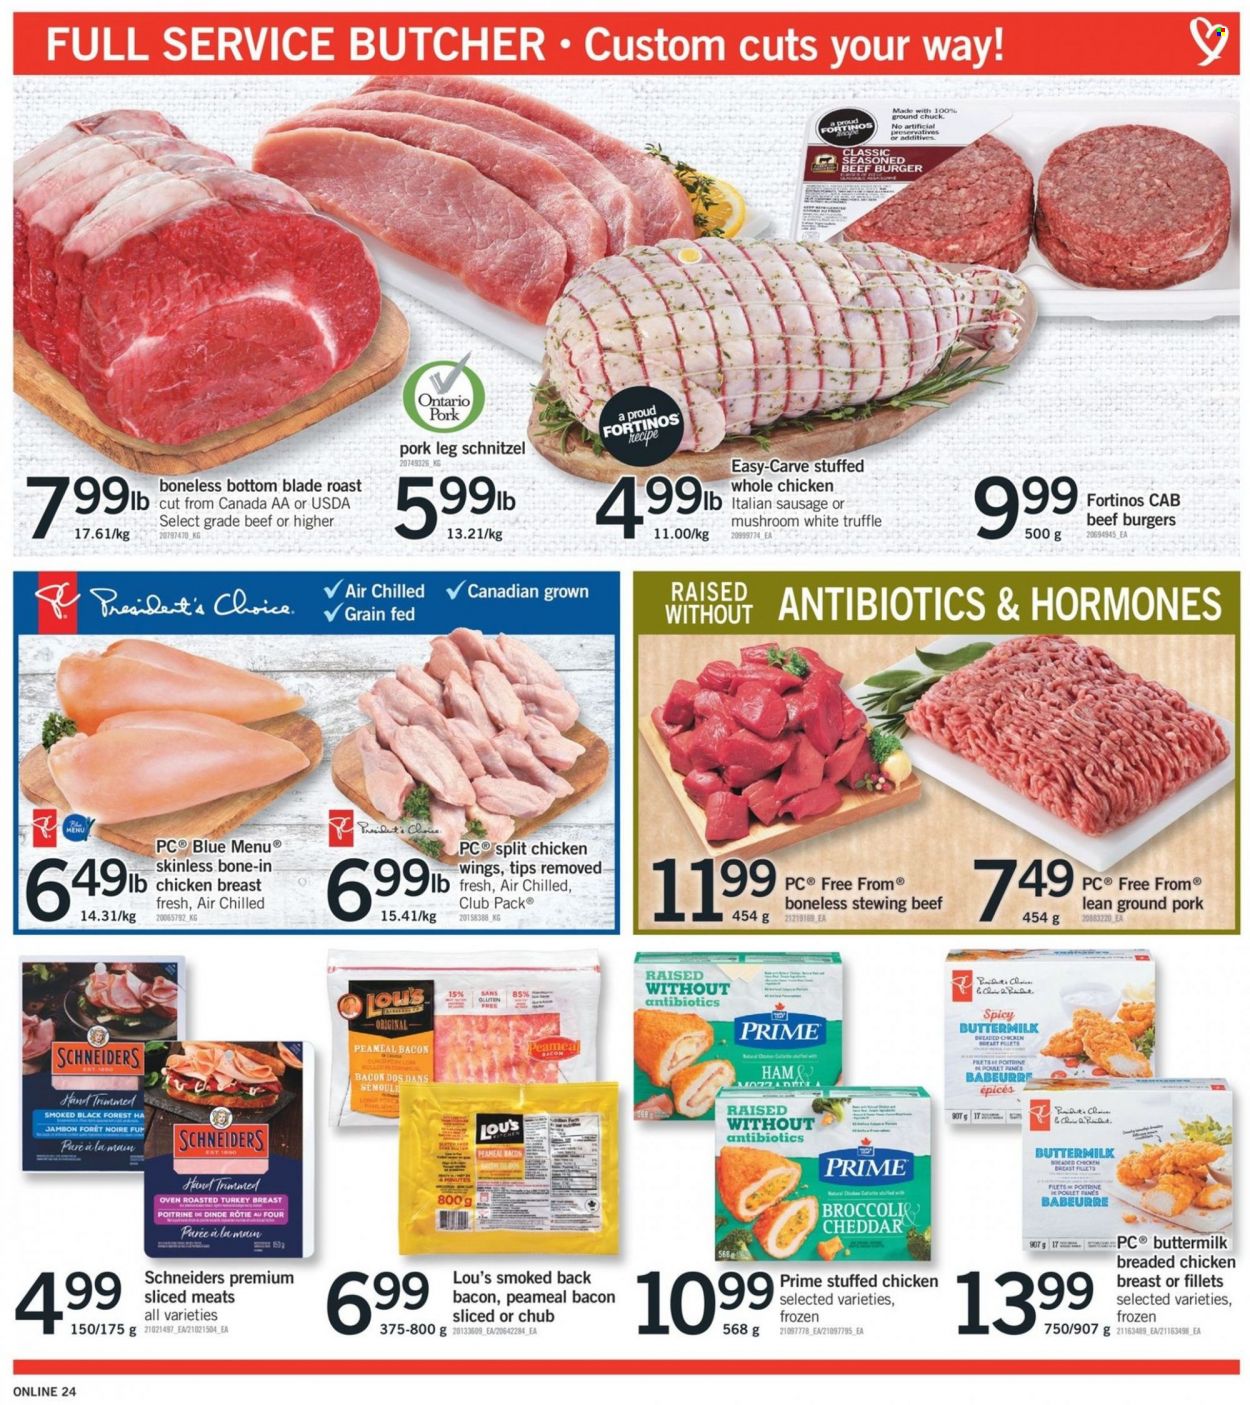 thumbnail - Fortinos Flyer - January 13, 2022 - January 19, 2022 - Sales products - mushrooms, broccoli, hamburger, fried chicken, schnitzel, beef burger, stuffed chicken, bacon, sausage, italian sausage, cheese, buttermilk, chicken wings, truffles, whole chicken, chicken, turkey, beef meat, ground chuck, stewing beef, ground pork, pork meat, pork leg. Page 5.